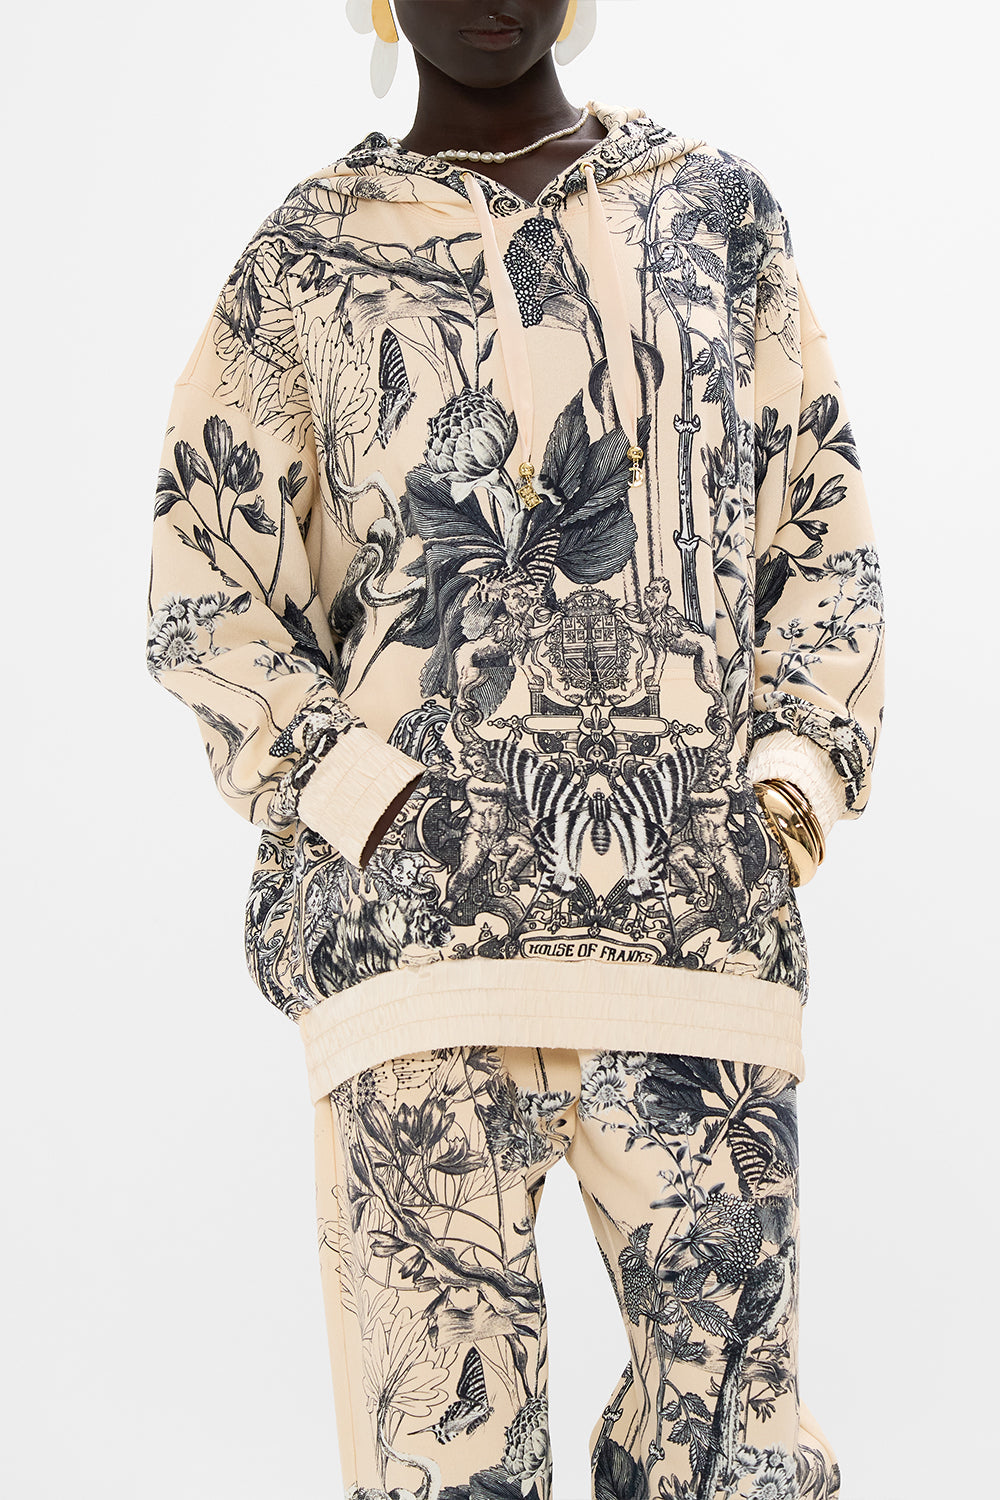 CAMILLA oversized hoodie in Etched Into Eternity print